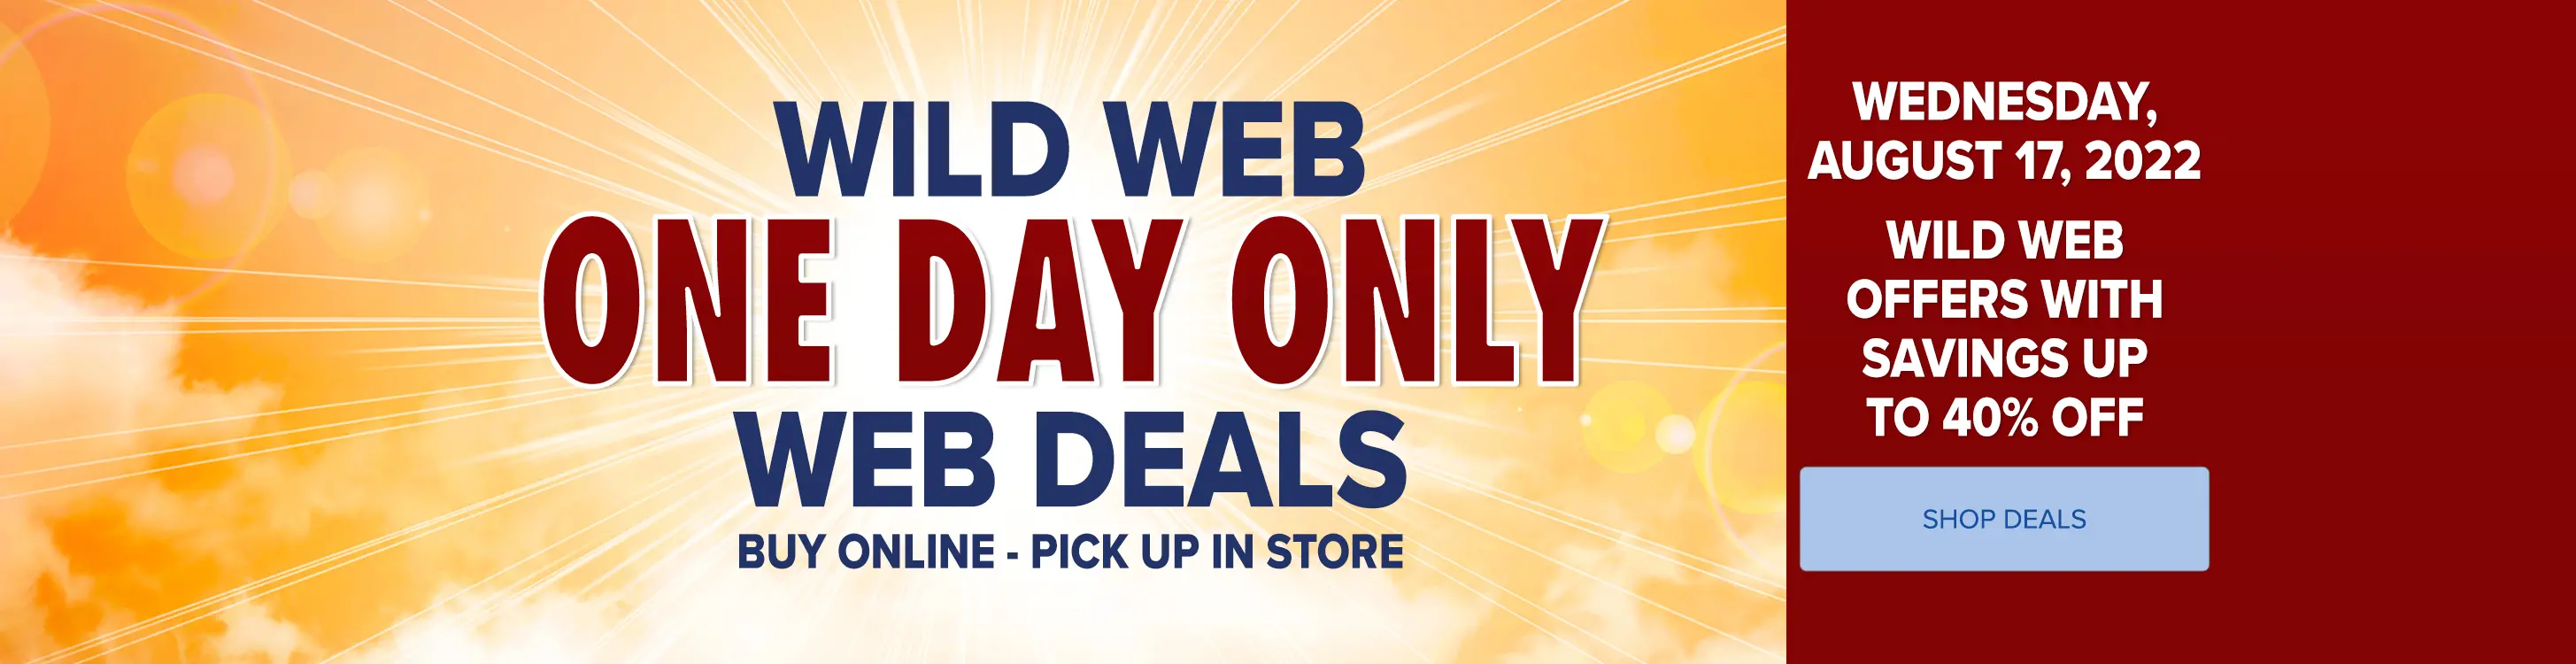 One Day Only! Wild Web Offers with Savings up to 40% Off!